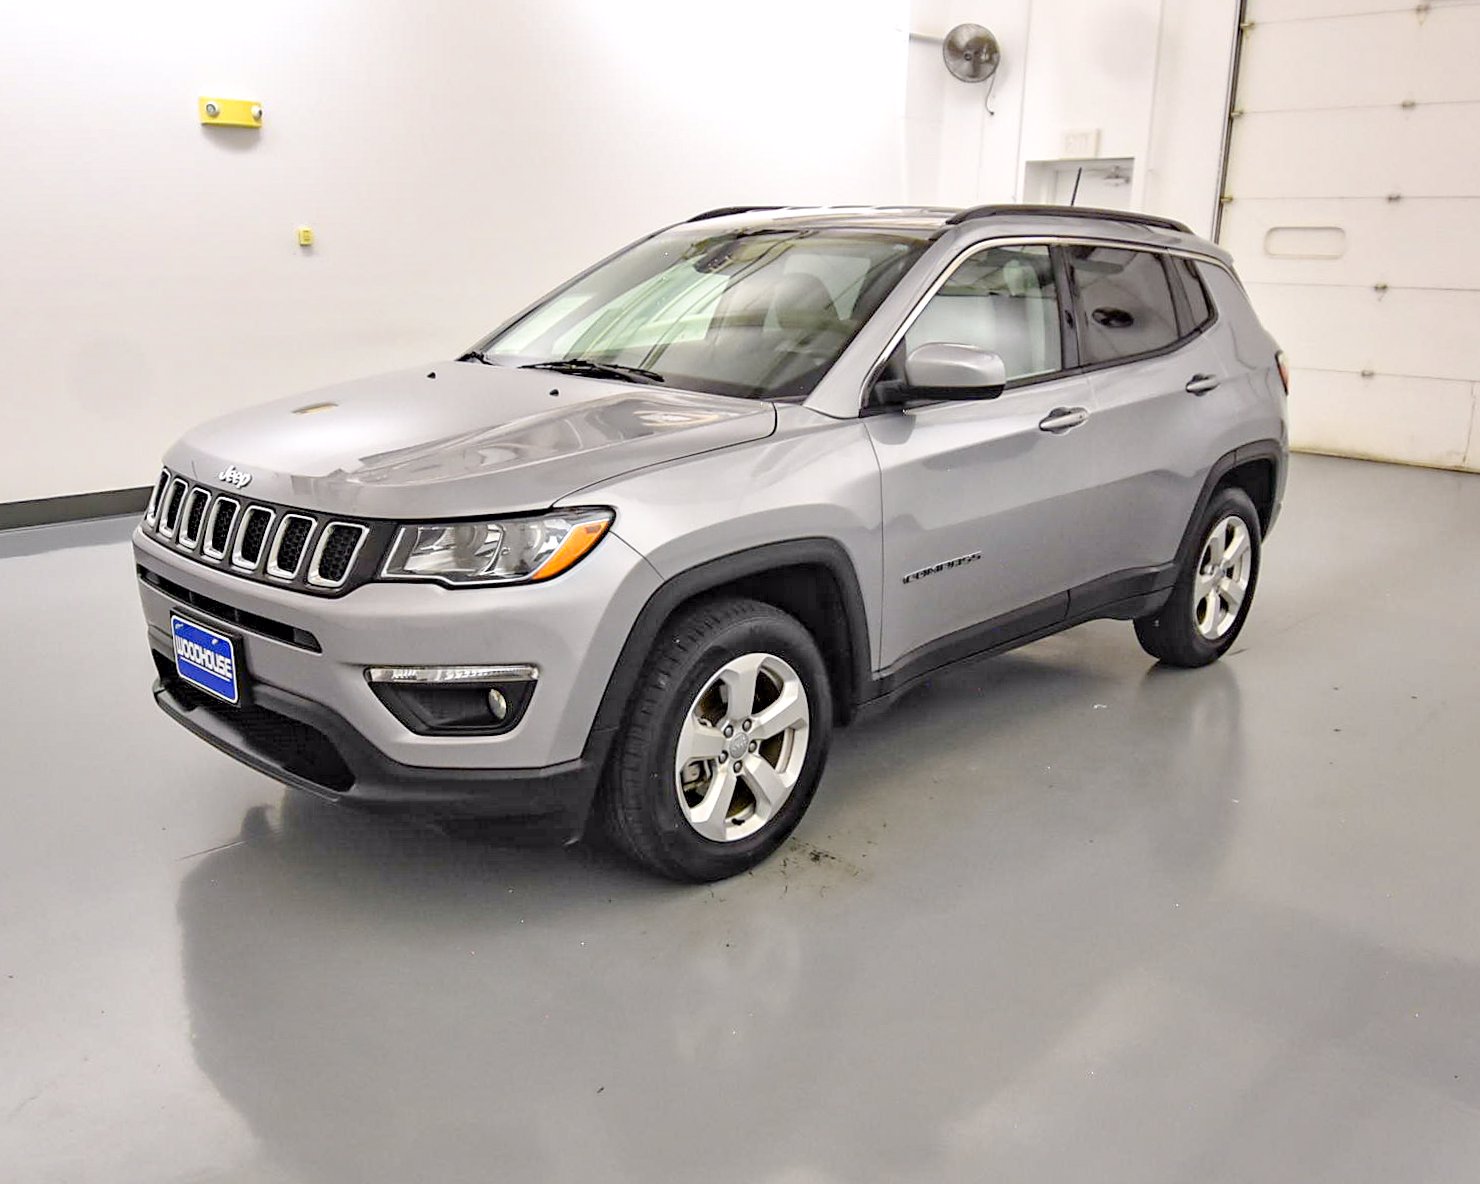 PreOwned 2017 Jeep Compass Latitude 4WD